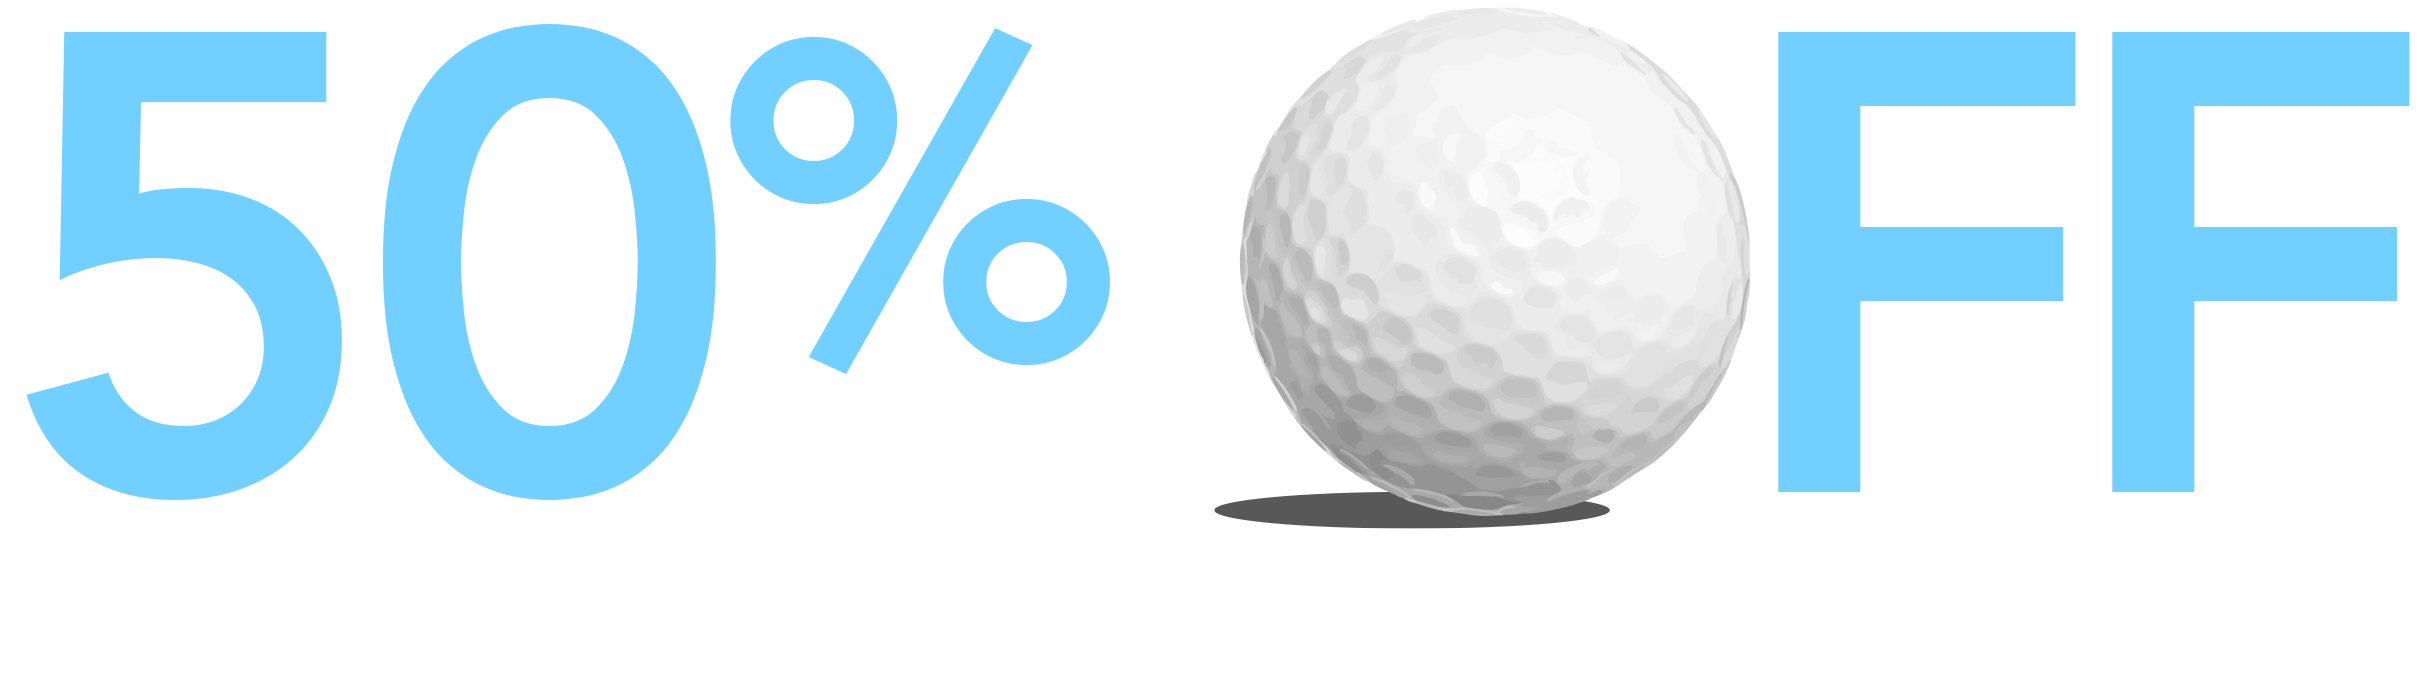 $100 off fitting with club purchase